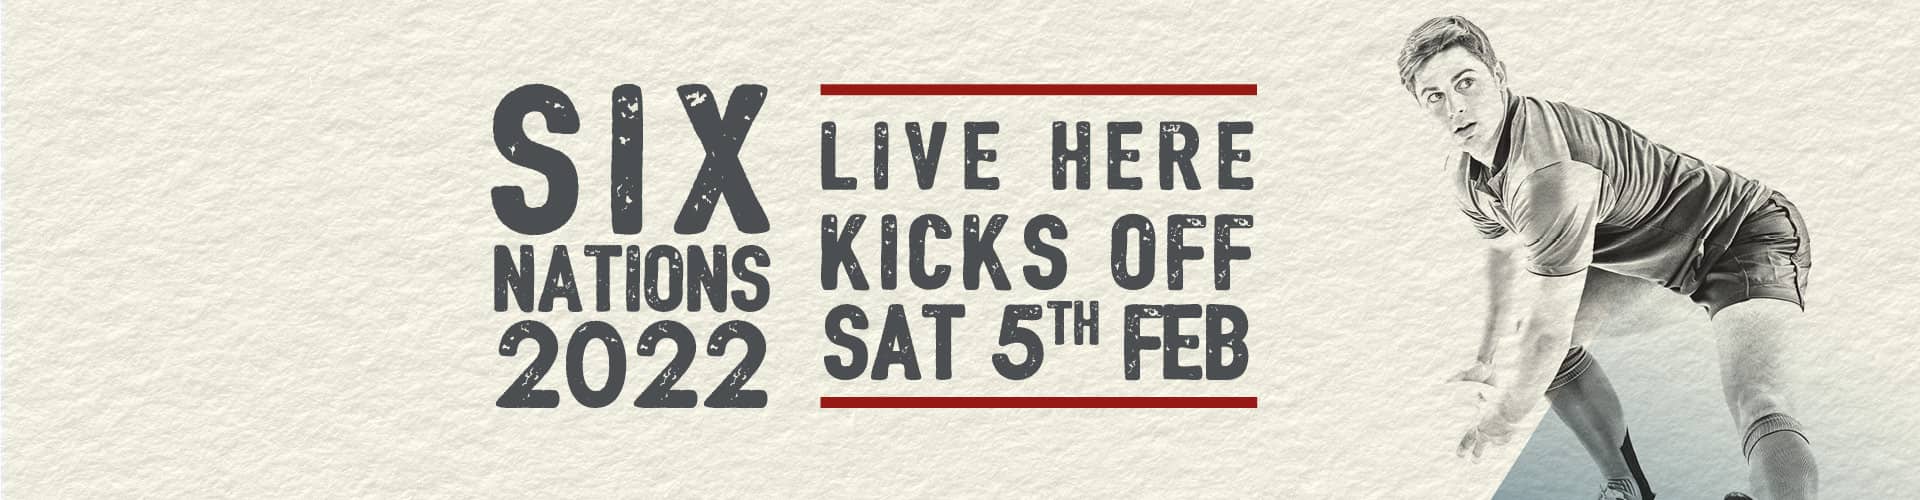 Watch the Six Nations live at The Goddard Arms